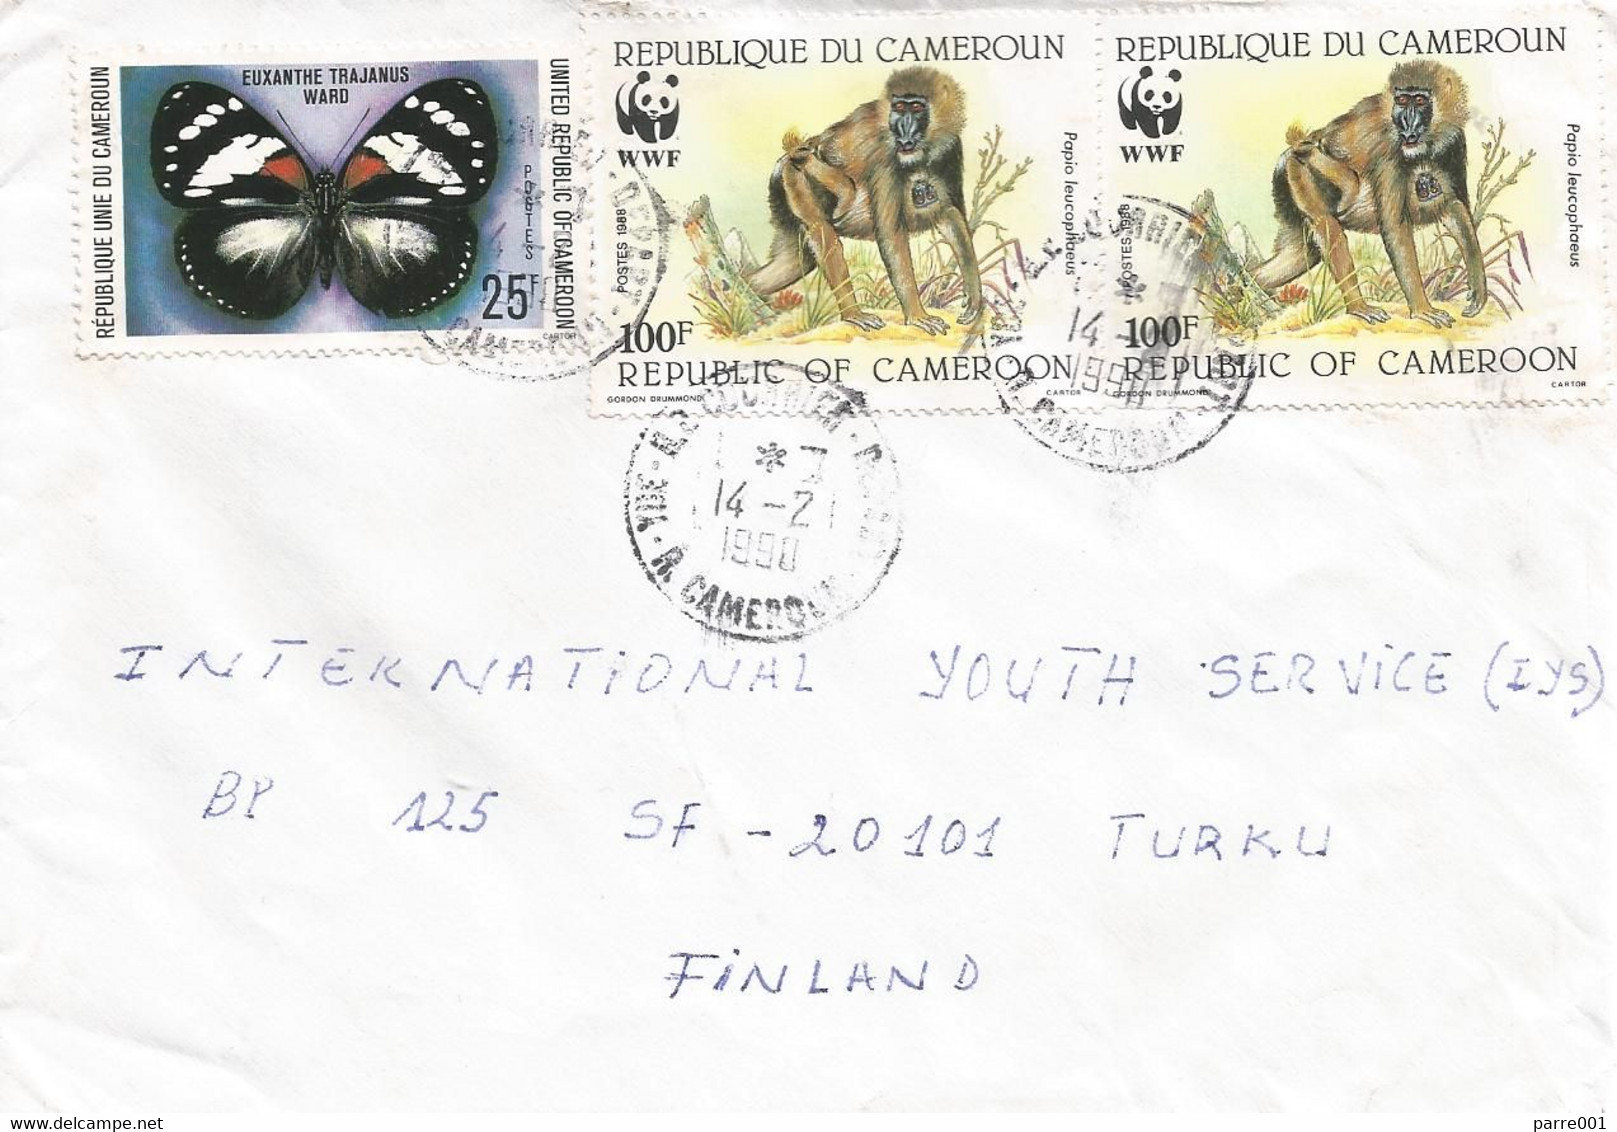 Cameroon Cameroun 1990 Yaounde WWF Drill Ape Monkey Trajan's Forest Queen Euxanthe Trajanus Butterfly Cover - Cartas & Documentos